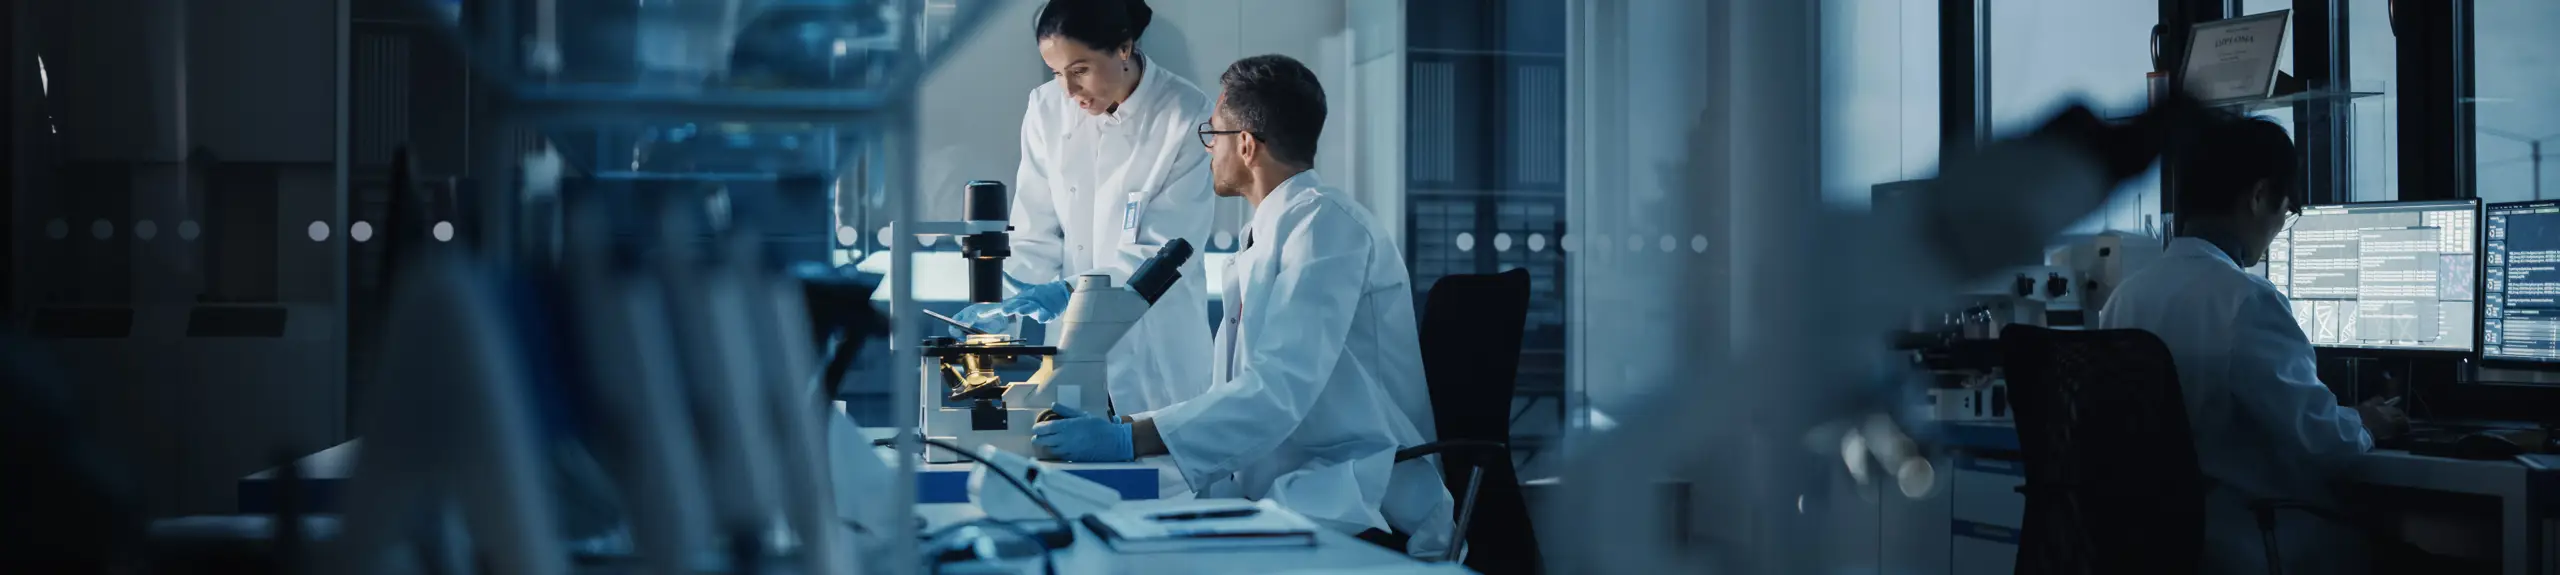 People working in the laboratory